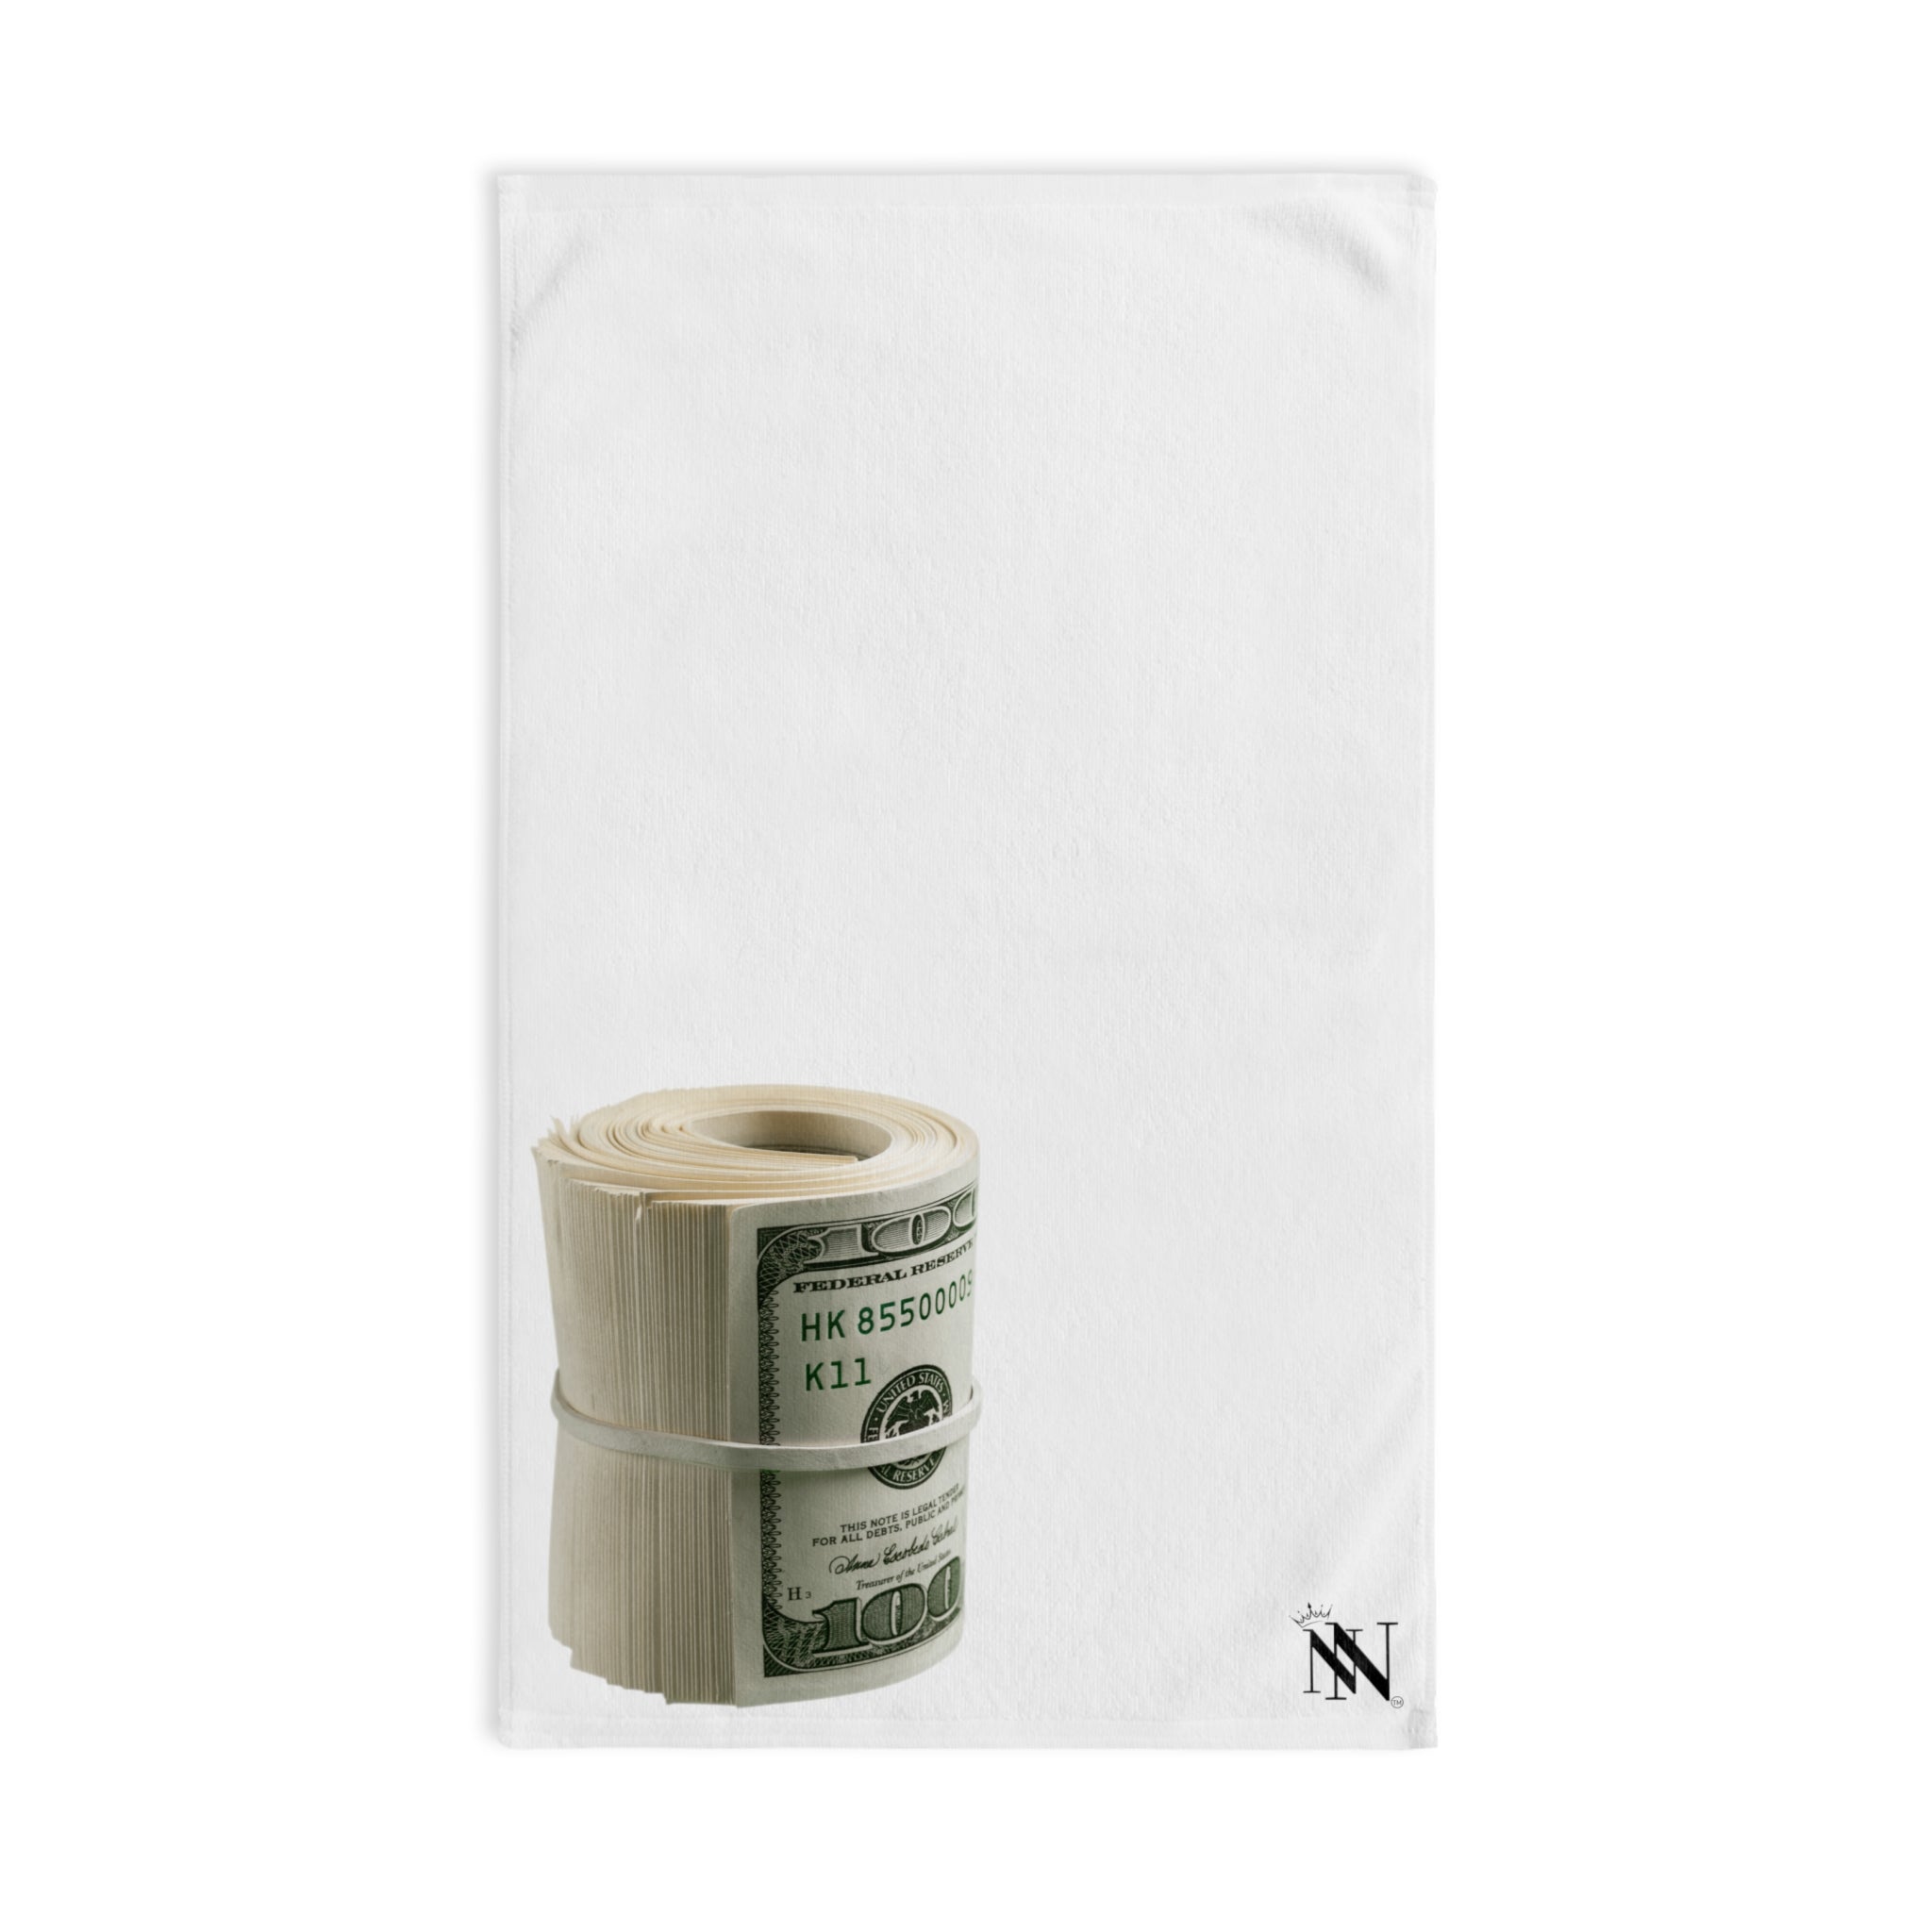 Cash Roll Money 3D White | Funny Gifts for Men - Gifts for Him - Birthday Gifts for Men, Him, Her, Husband, Boyfriend, Girlfriend, New Couple Gifts, Fathers & Valentines Day Gifts, Christmas Gifts NECTAR NAPKINS